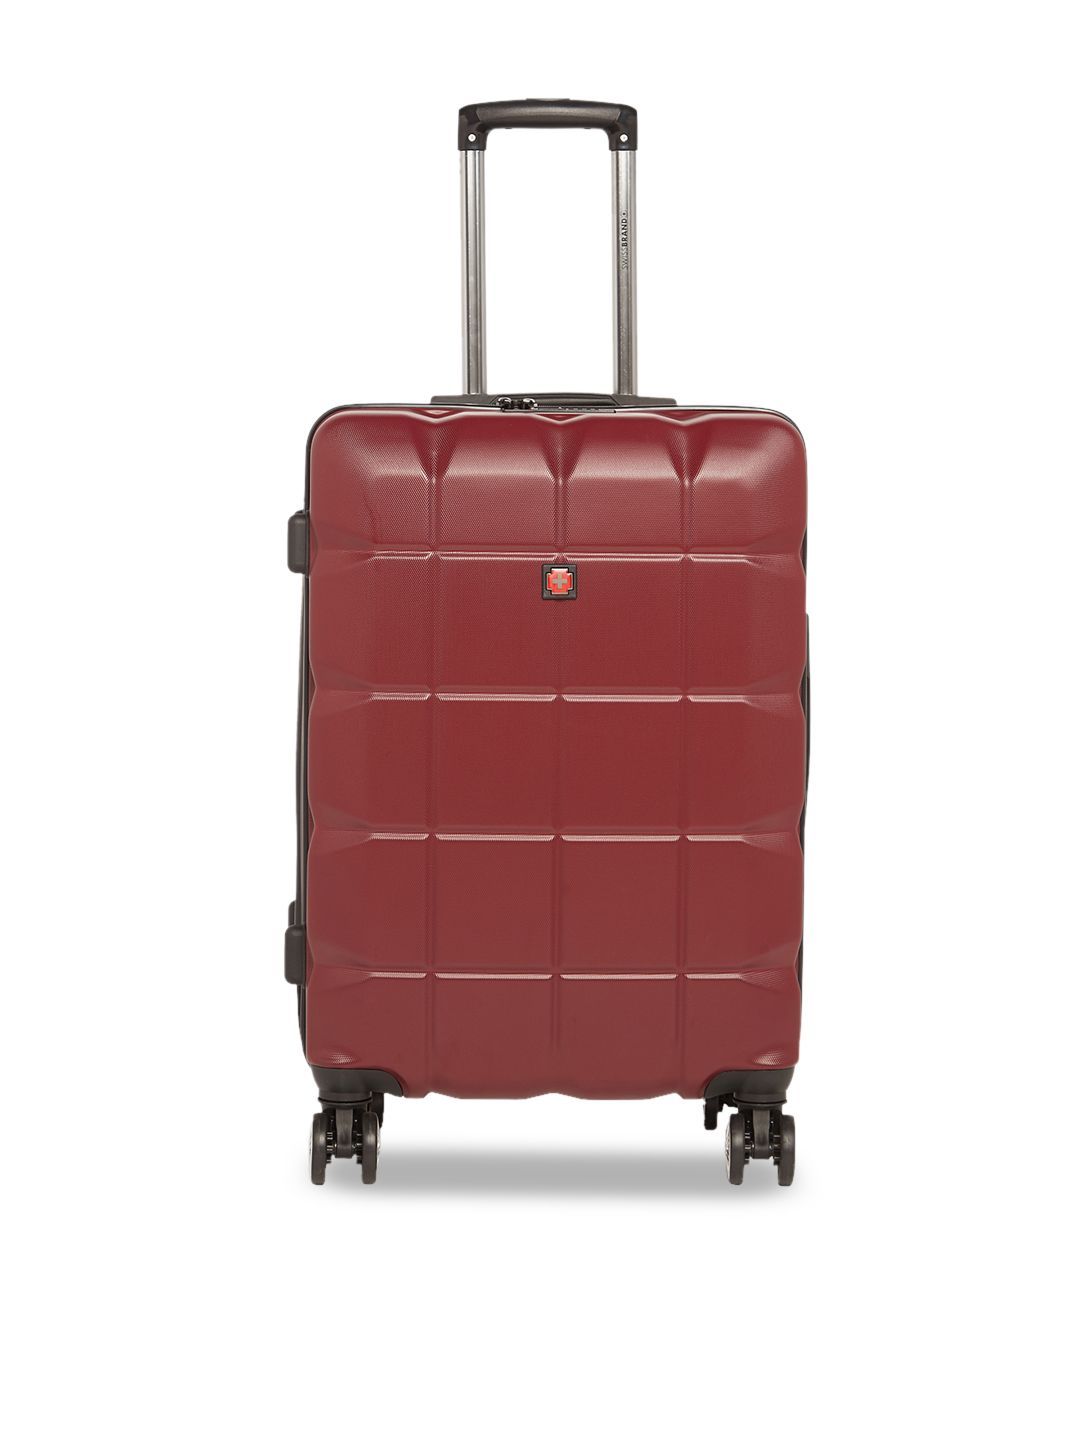 SWISS BRAND Burgundy Solid Friburg 360-Degree Rotation Hard-Sided Medium Trolley Suitcase Price in India